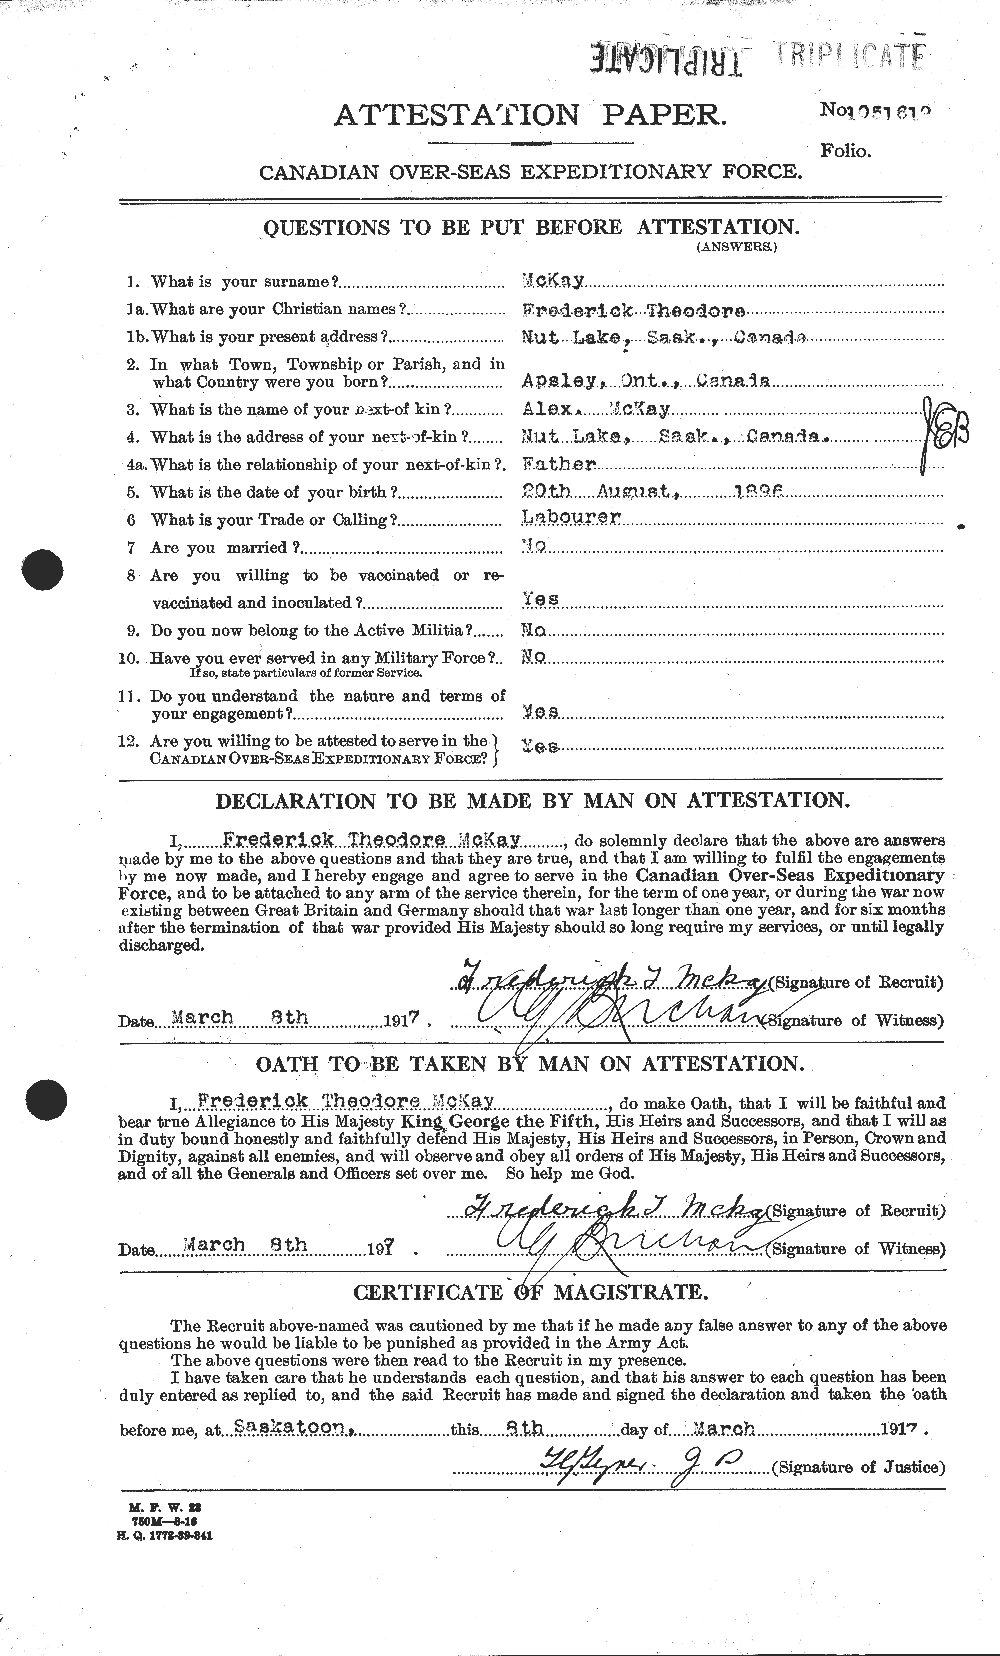 Personnel Records of the First World War - CEF 534621a